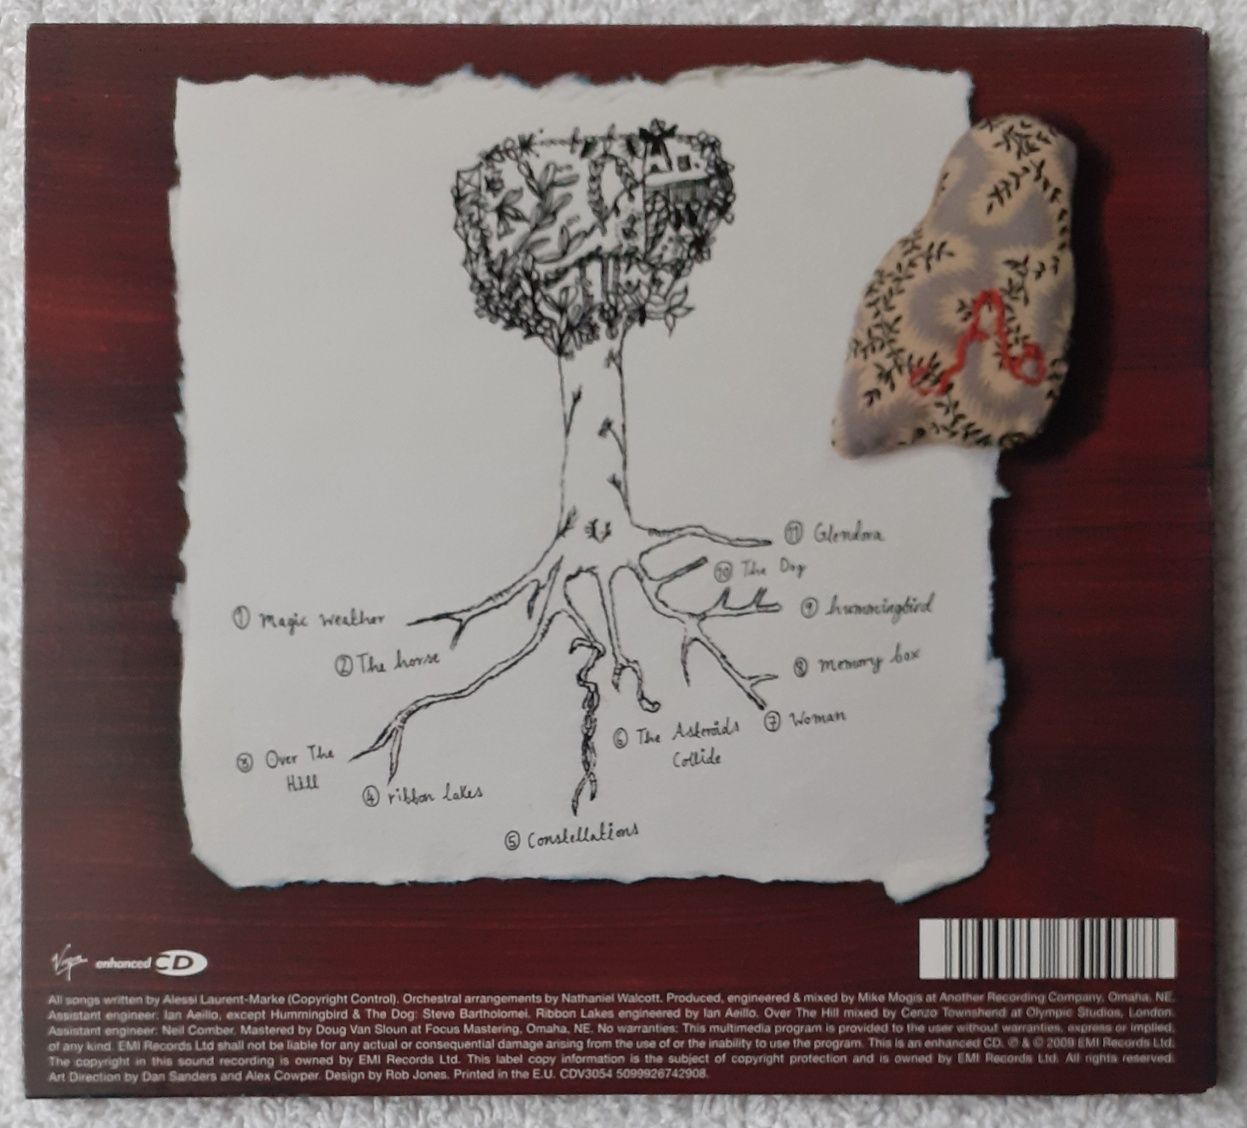 Alessi's Ark – Notes From The Treehouse (CD, Album)